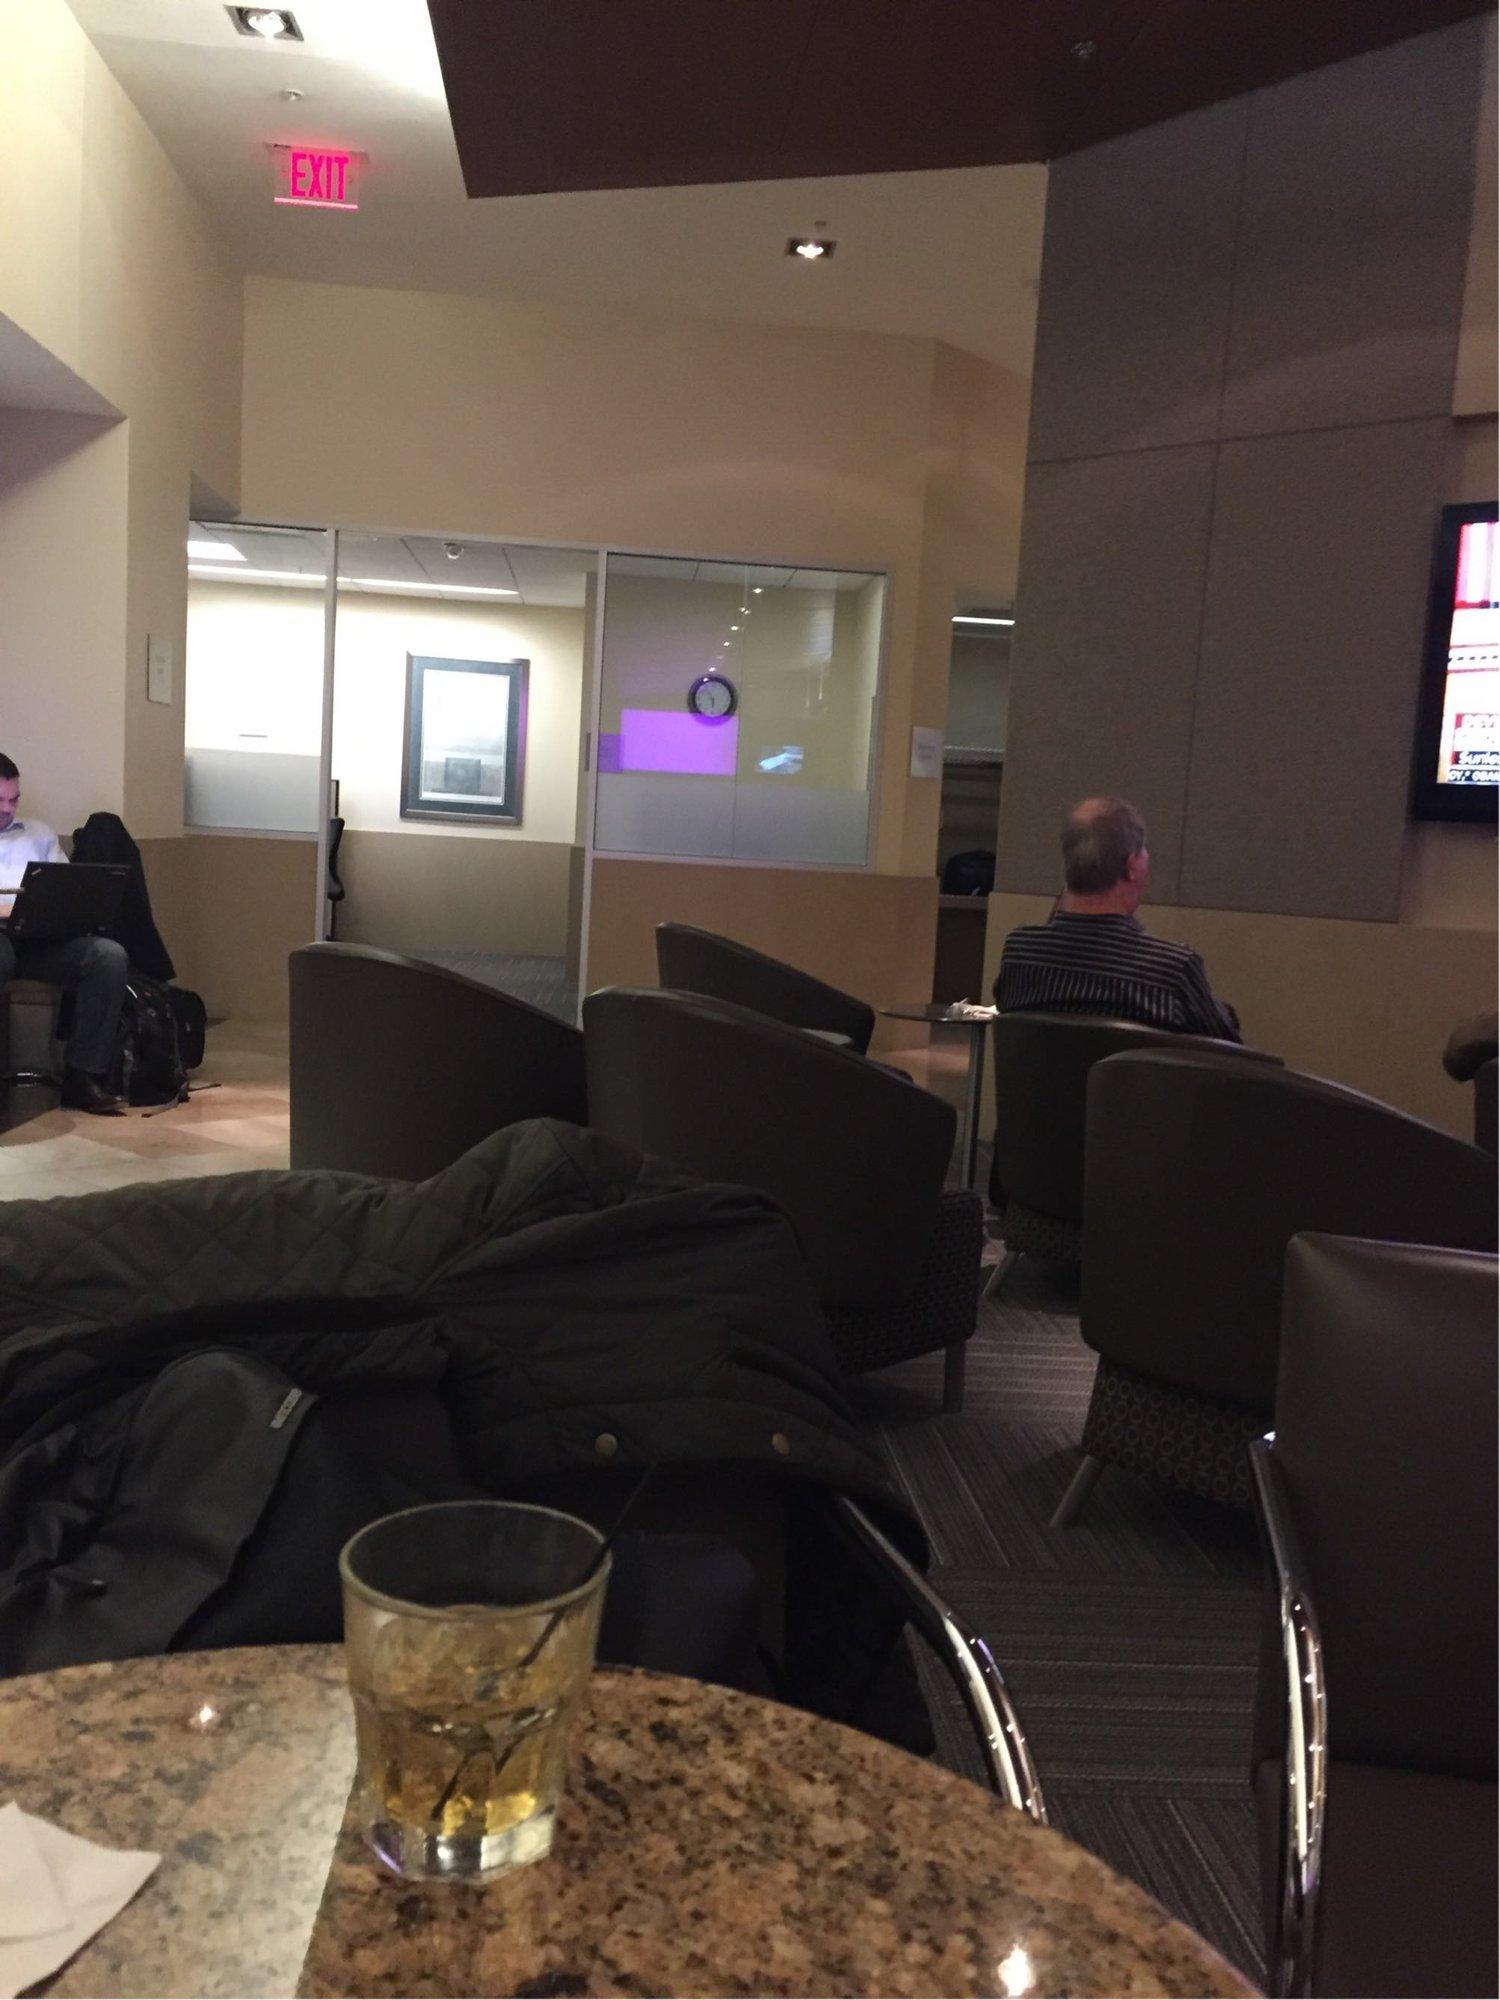 American Airlines Admirals Club image 17 of 31